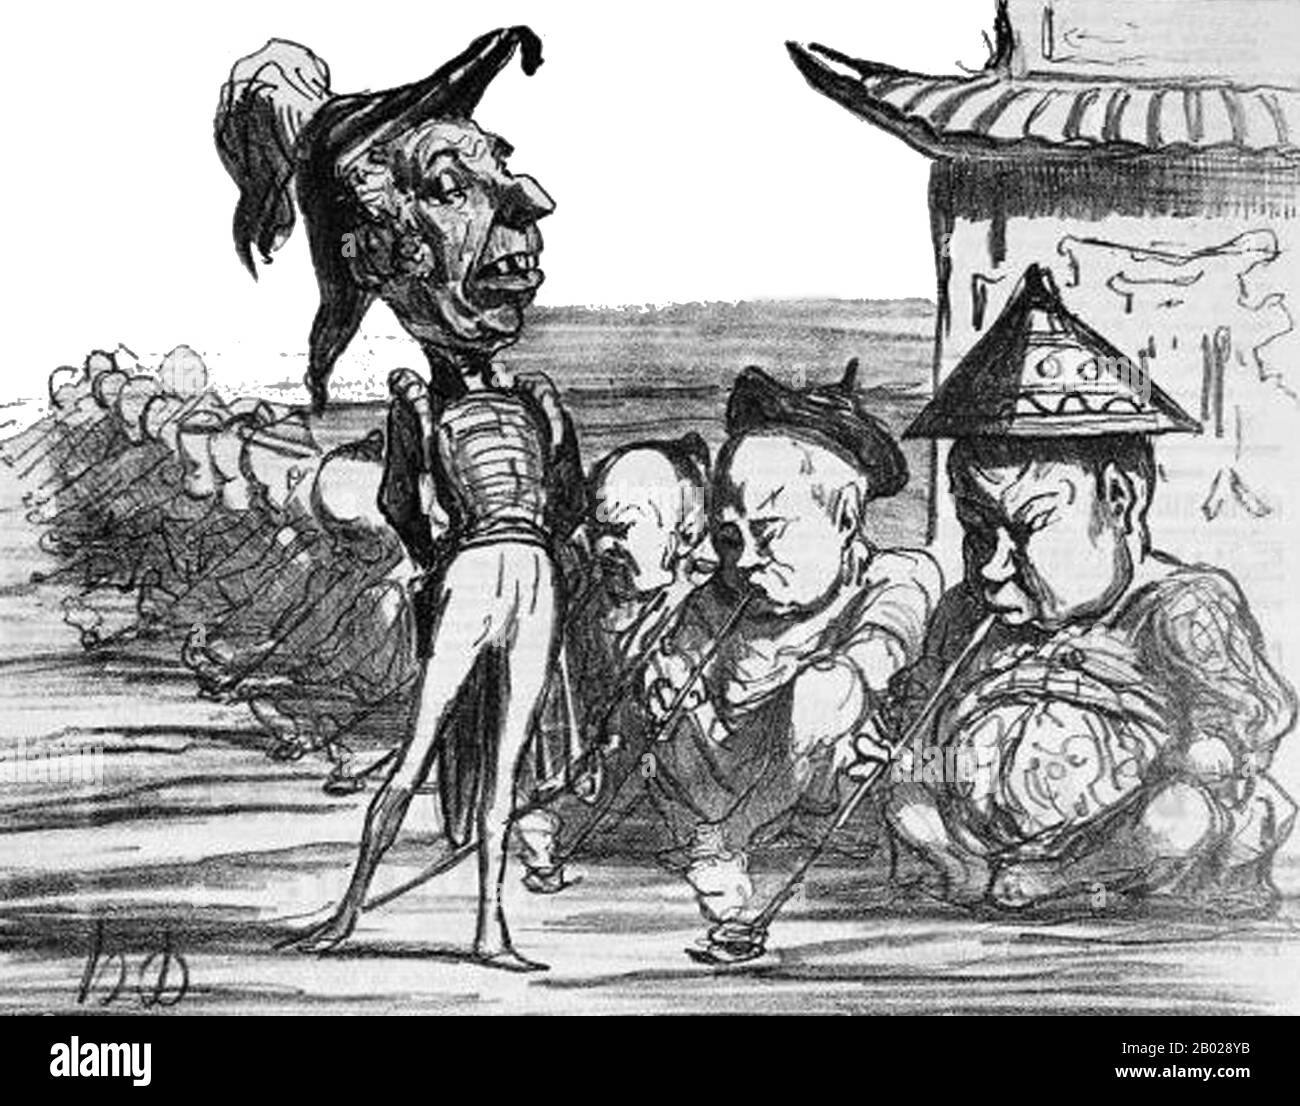 The Second Opium War, the Second Anglo-Chinese War, the Second China War, the Arrow War, or the Anglo-French expedition to China, was a war pitting the British Empire and the Second French Empire against the Qing Dynasty of China, lasting from 1856–1860. Stock Photo